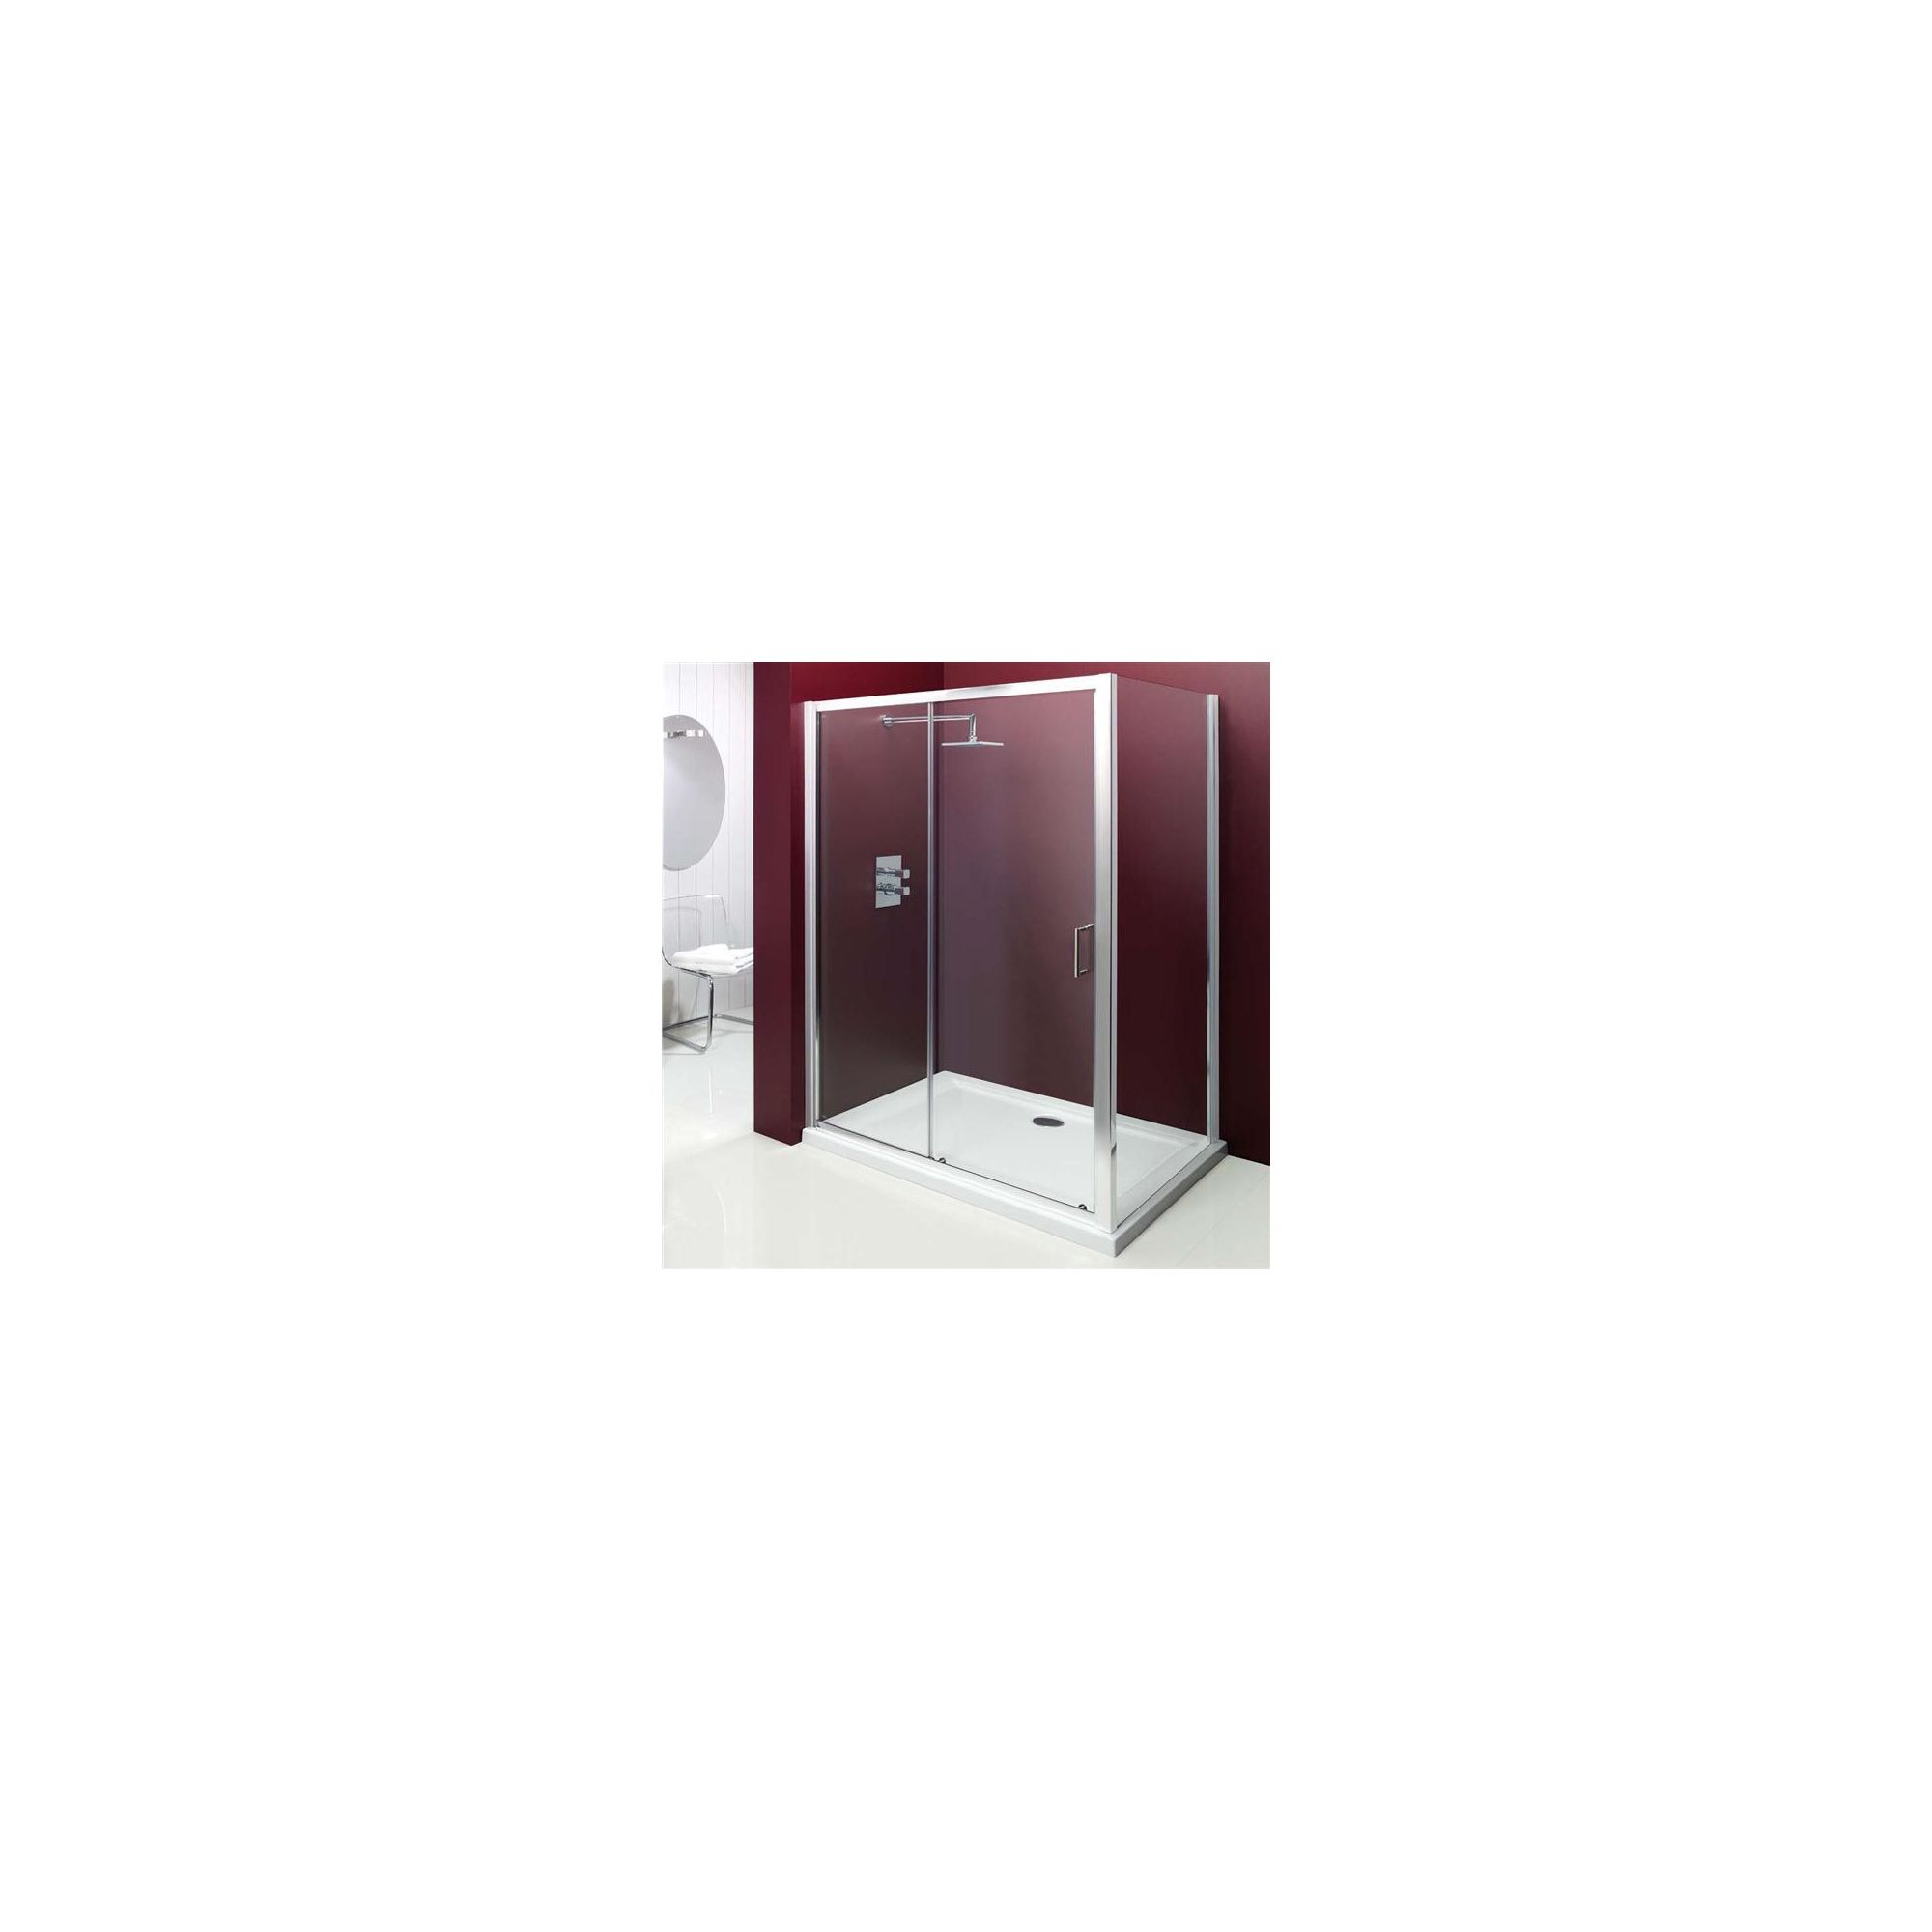 Merlyn Vivid Entree Sliding Door Shower Enclosure, 1200mm x 800mm, Low Profile Tray, 6mm Glass at Tesco Direct